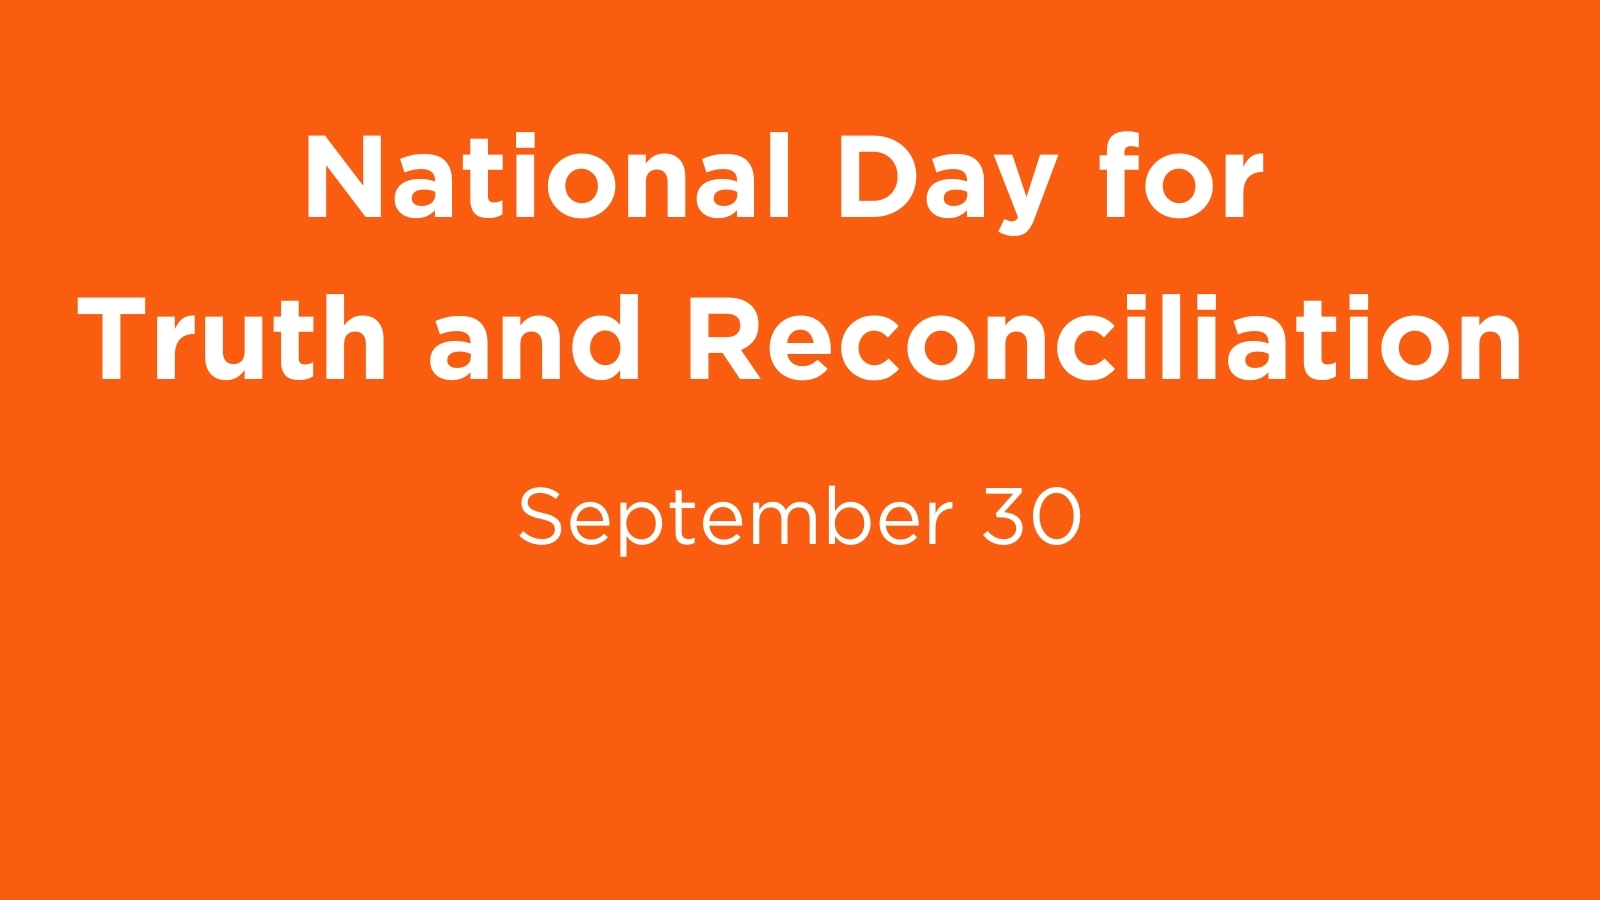 National Day for Truth and Reconciliation September 30